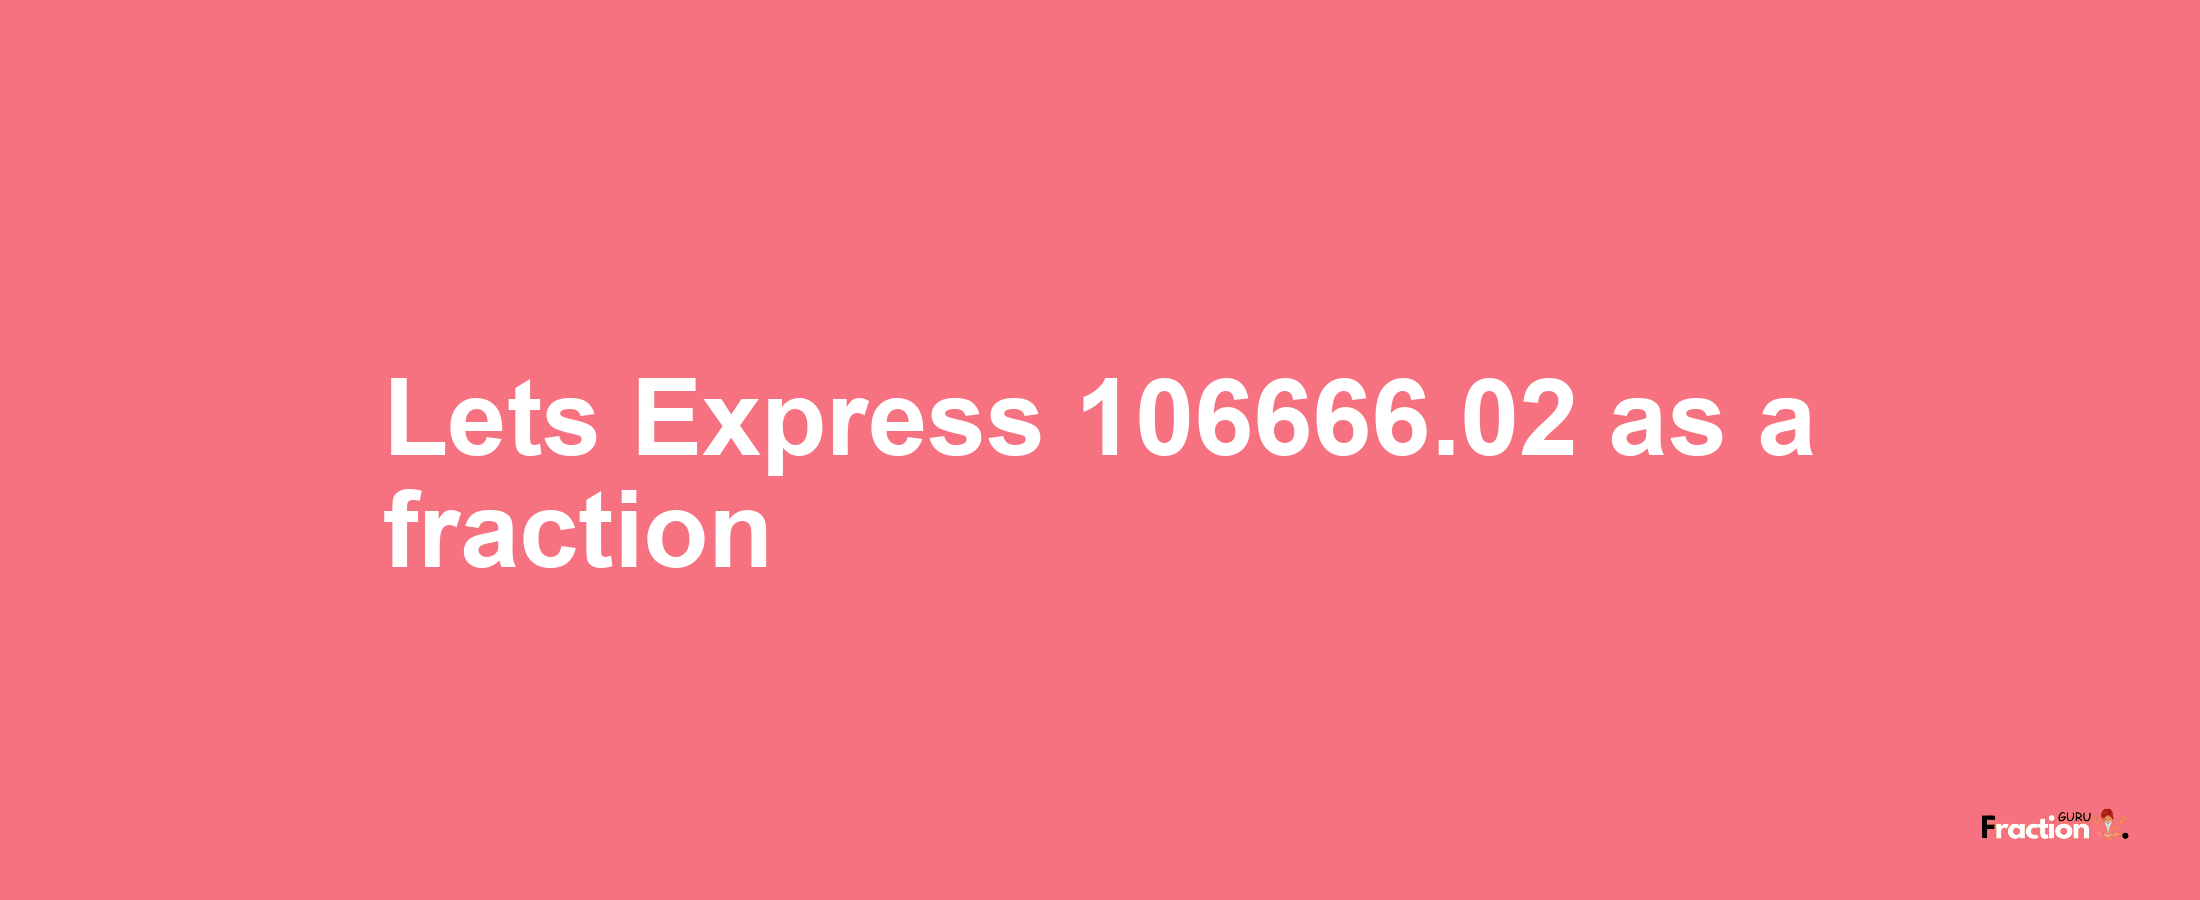 Lets Express 106666.02 as afraction